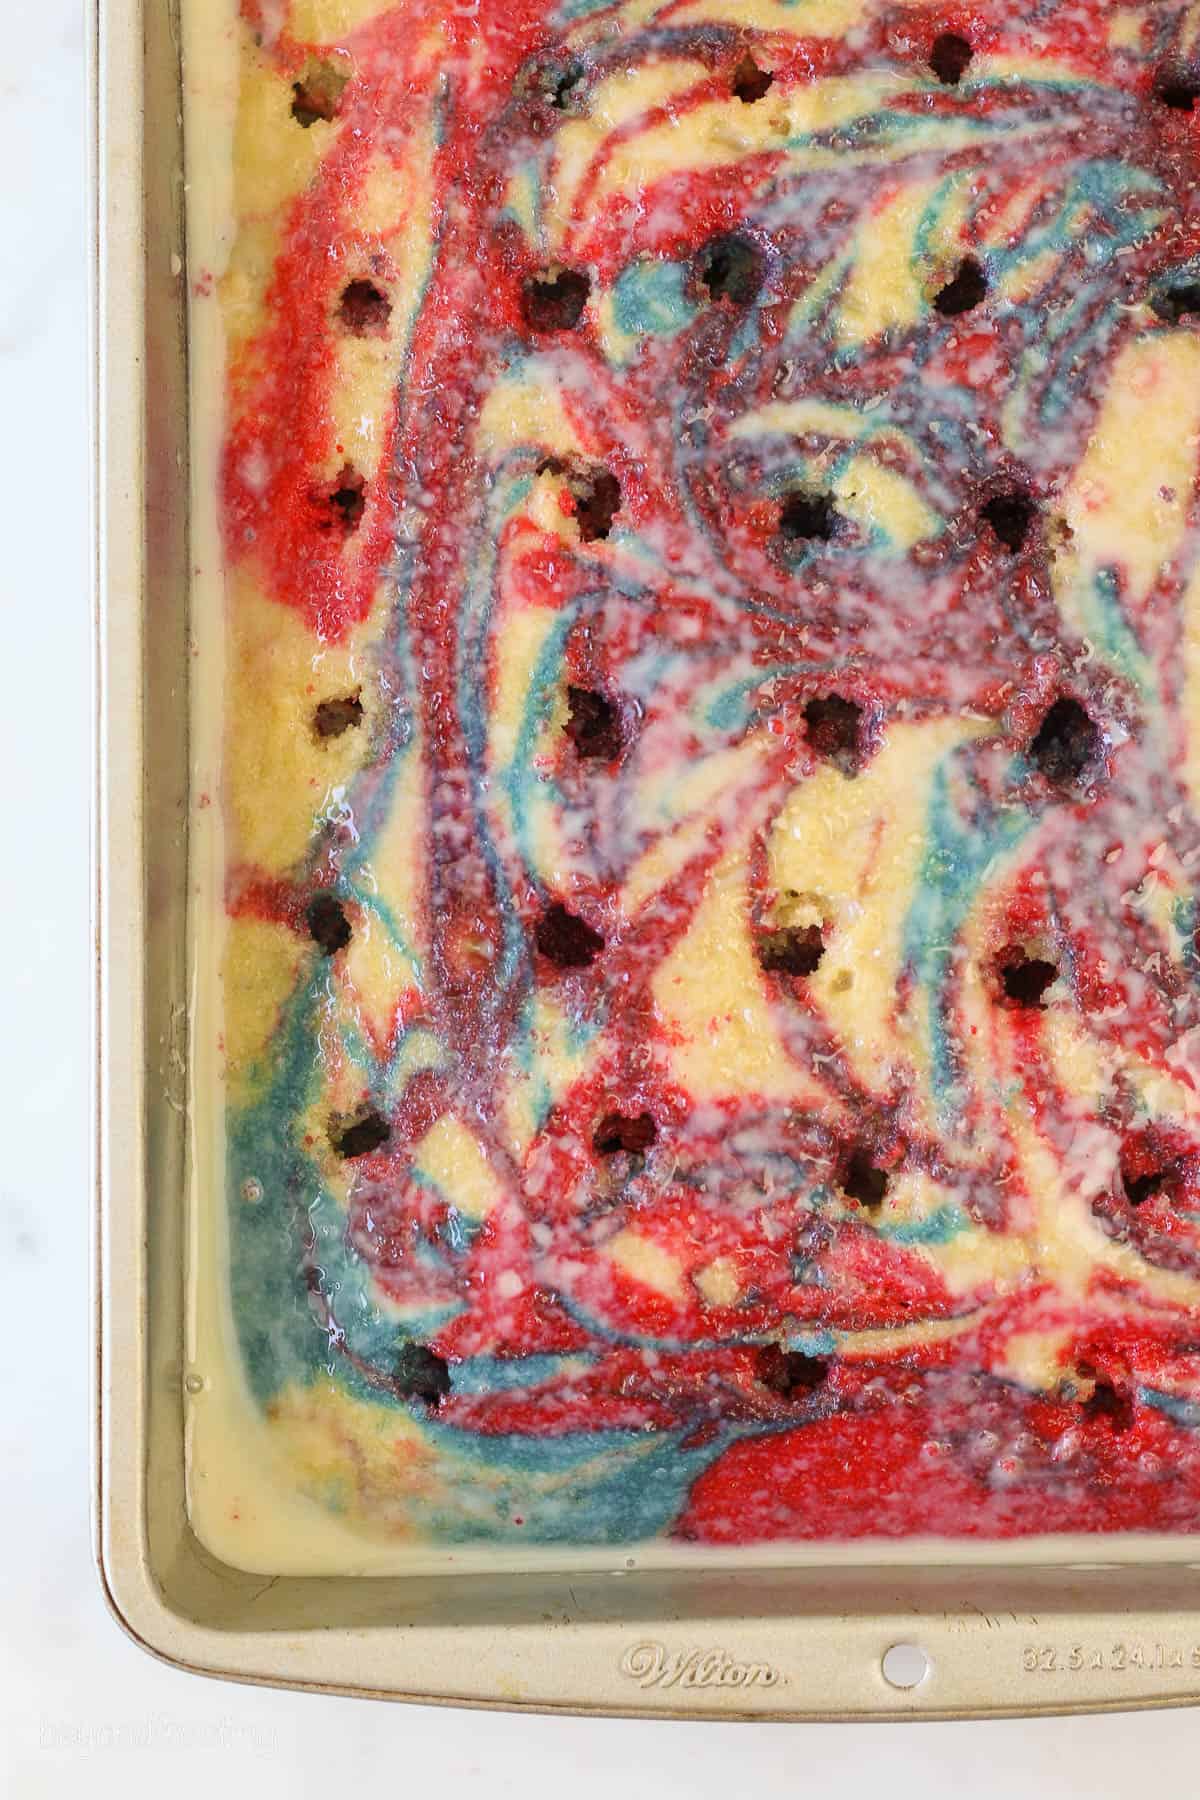 Overhead shot of a tye dye red white and blue cake with hole poked in it and sweetened condensed milk over top